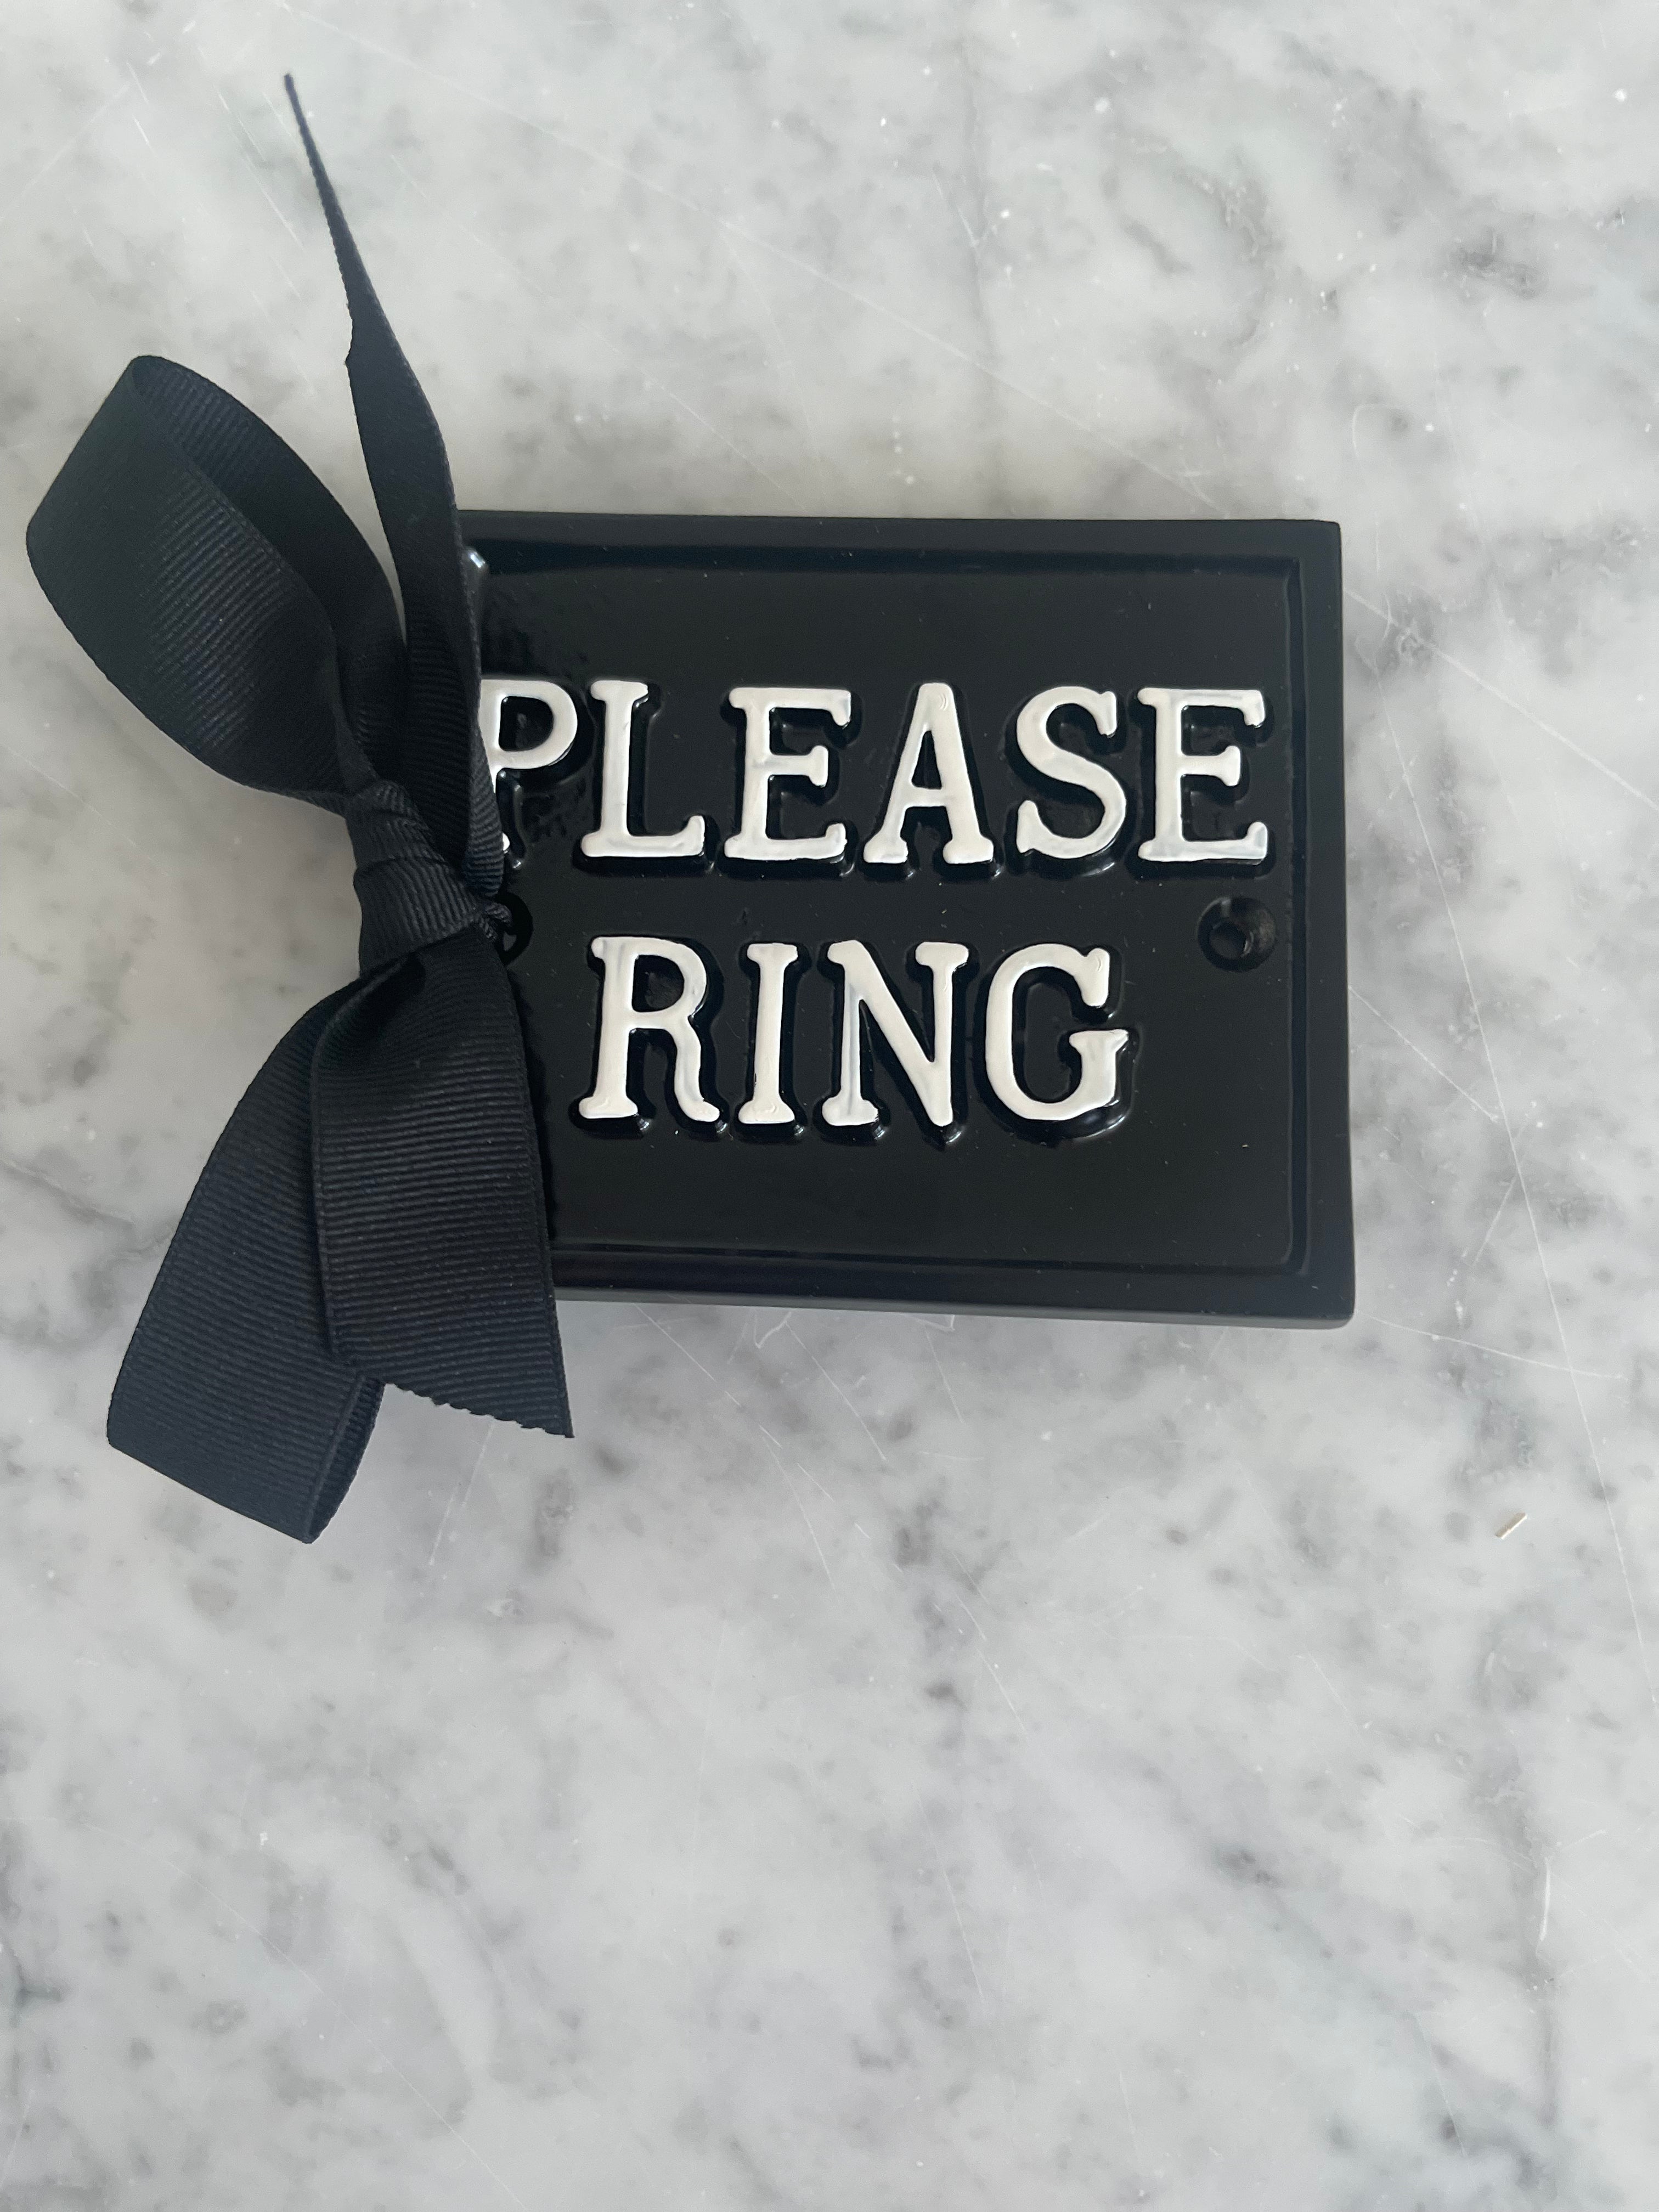 Black Cast Iron Sign 3.5” x 4” "Please Ring"  Made in UK